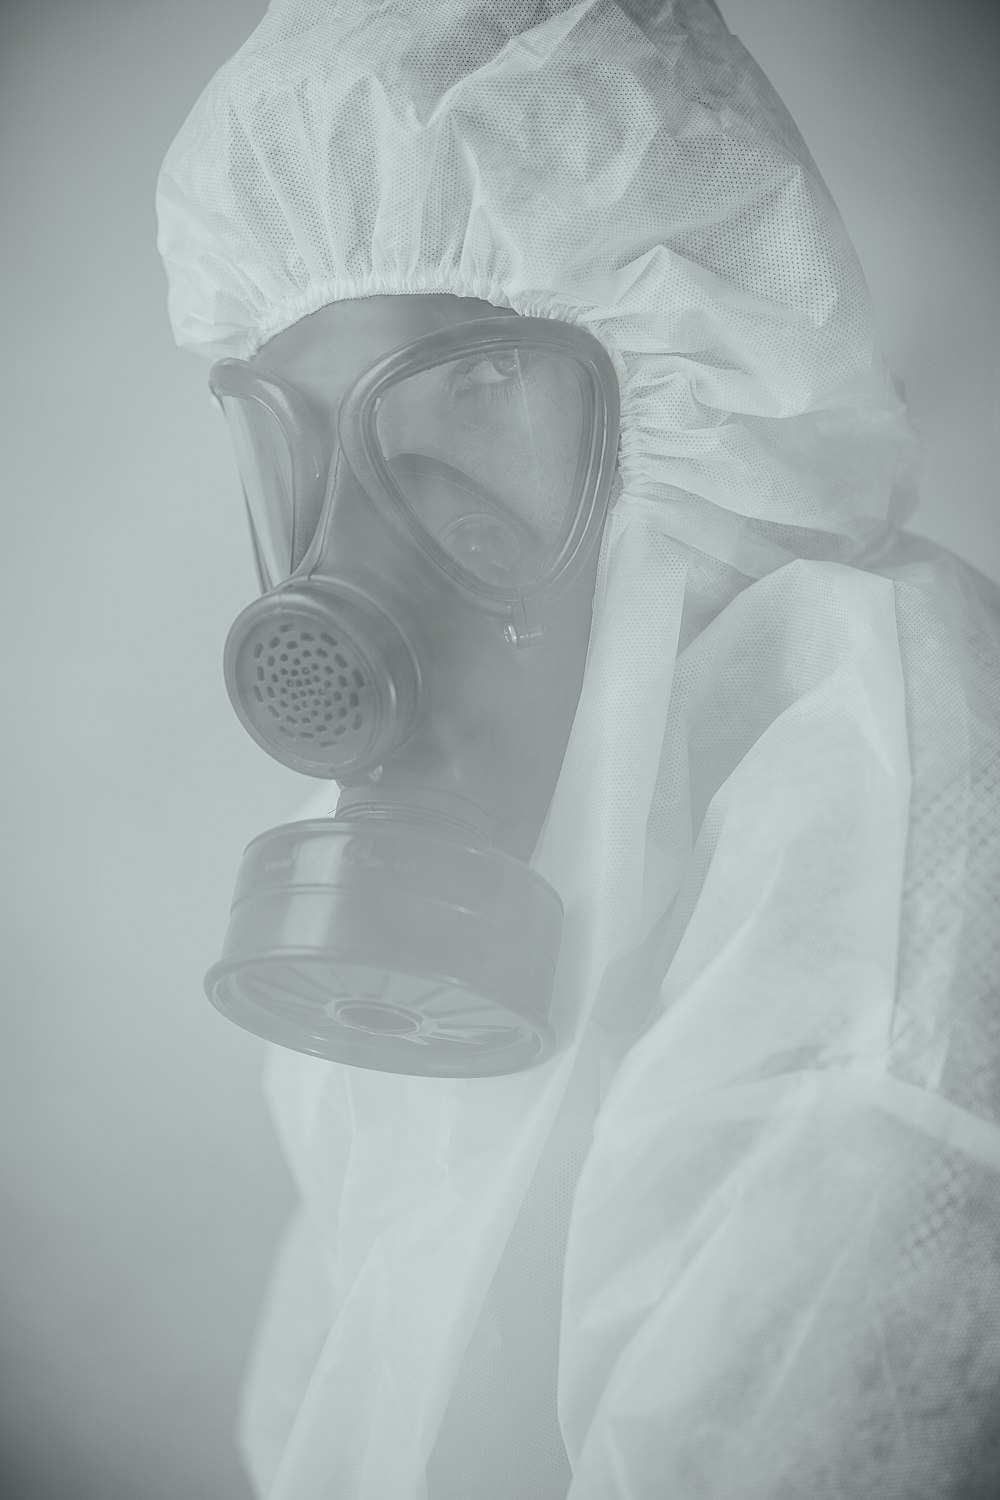 person wearing gas mask in grayscale photography